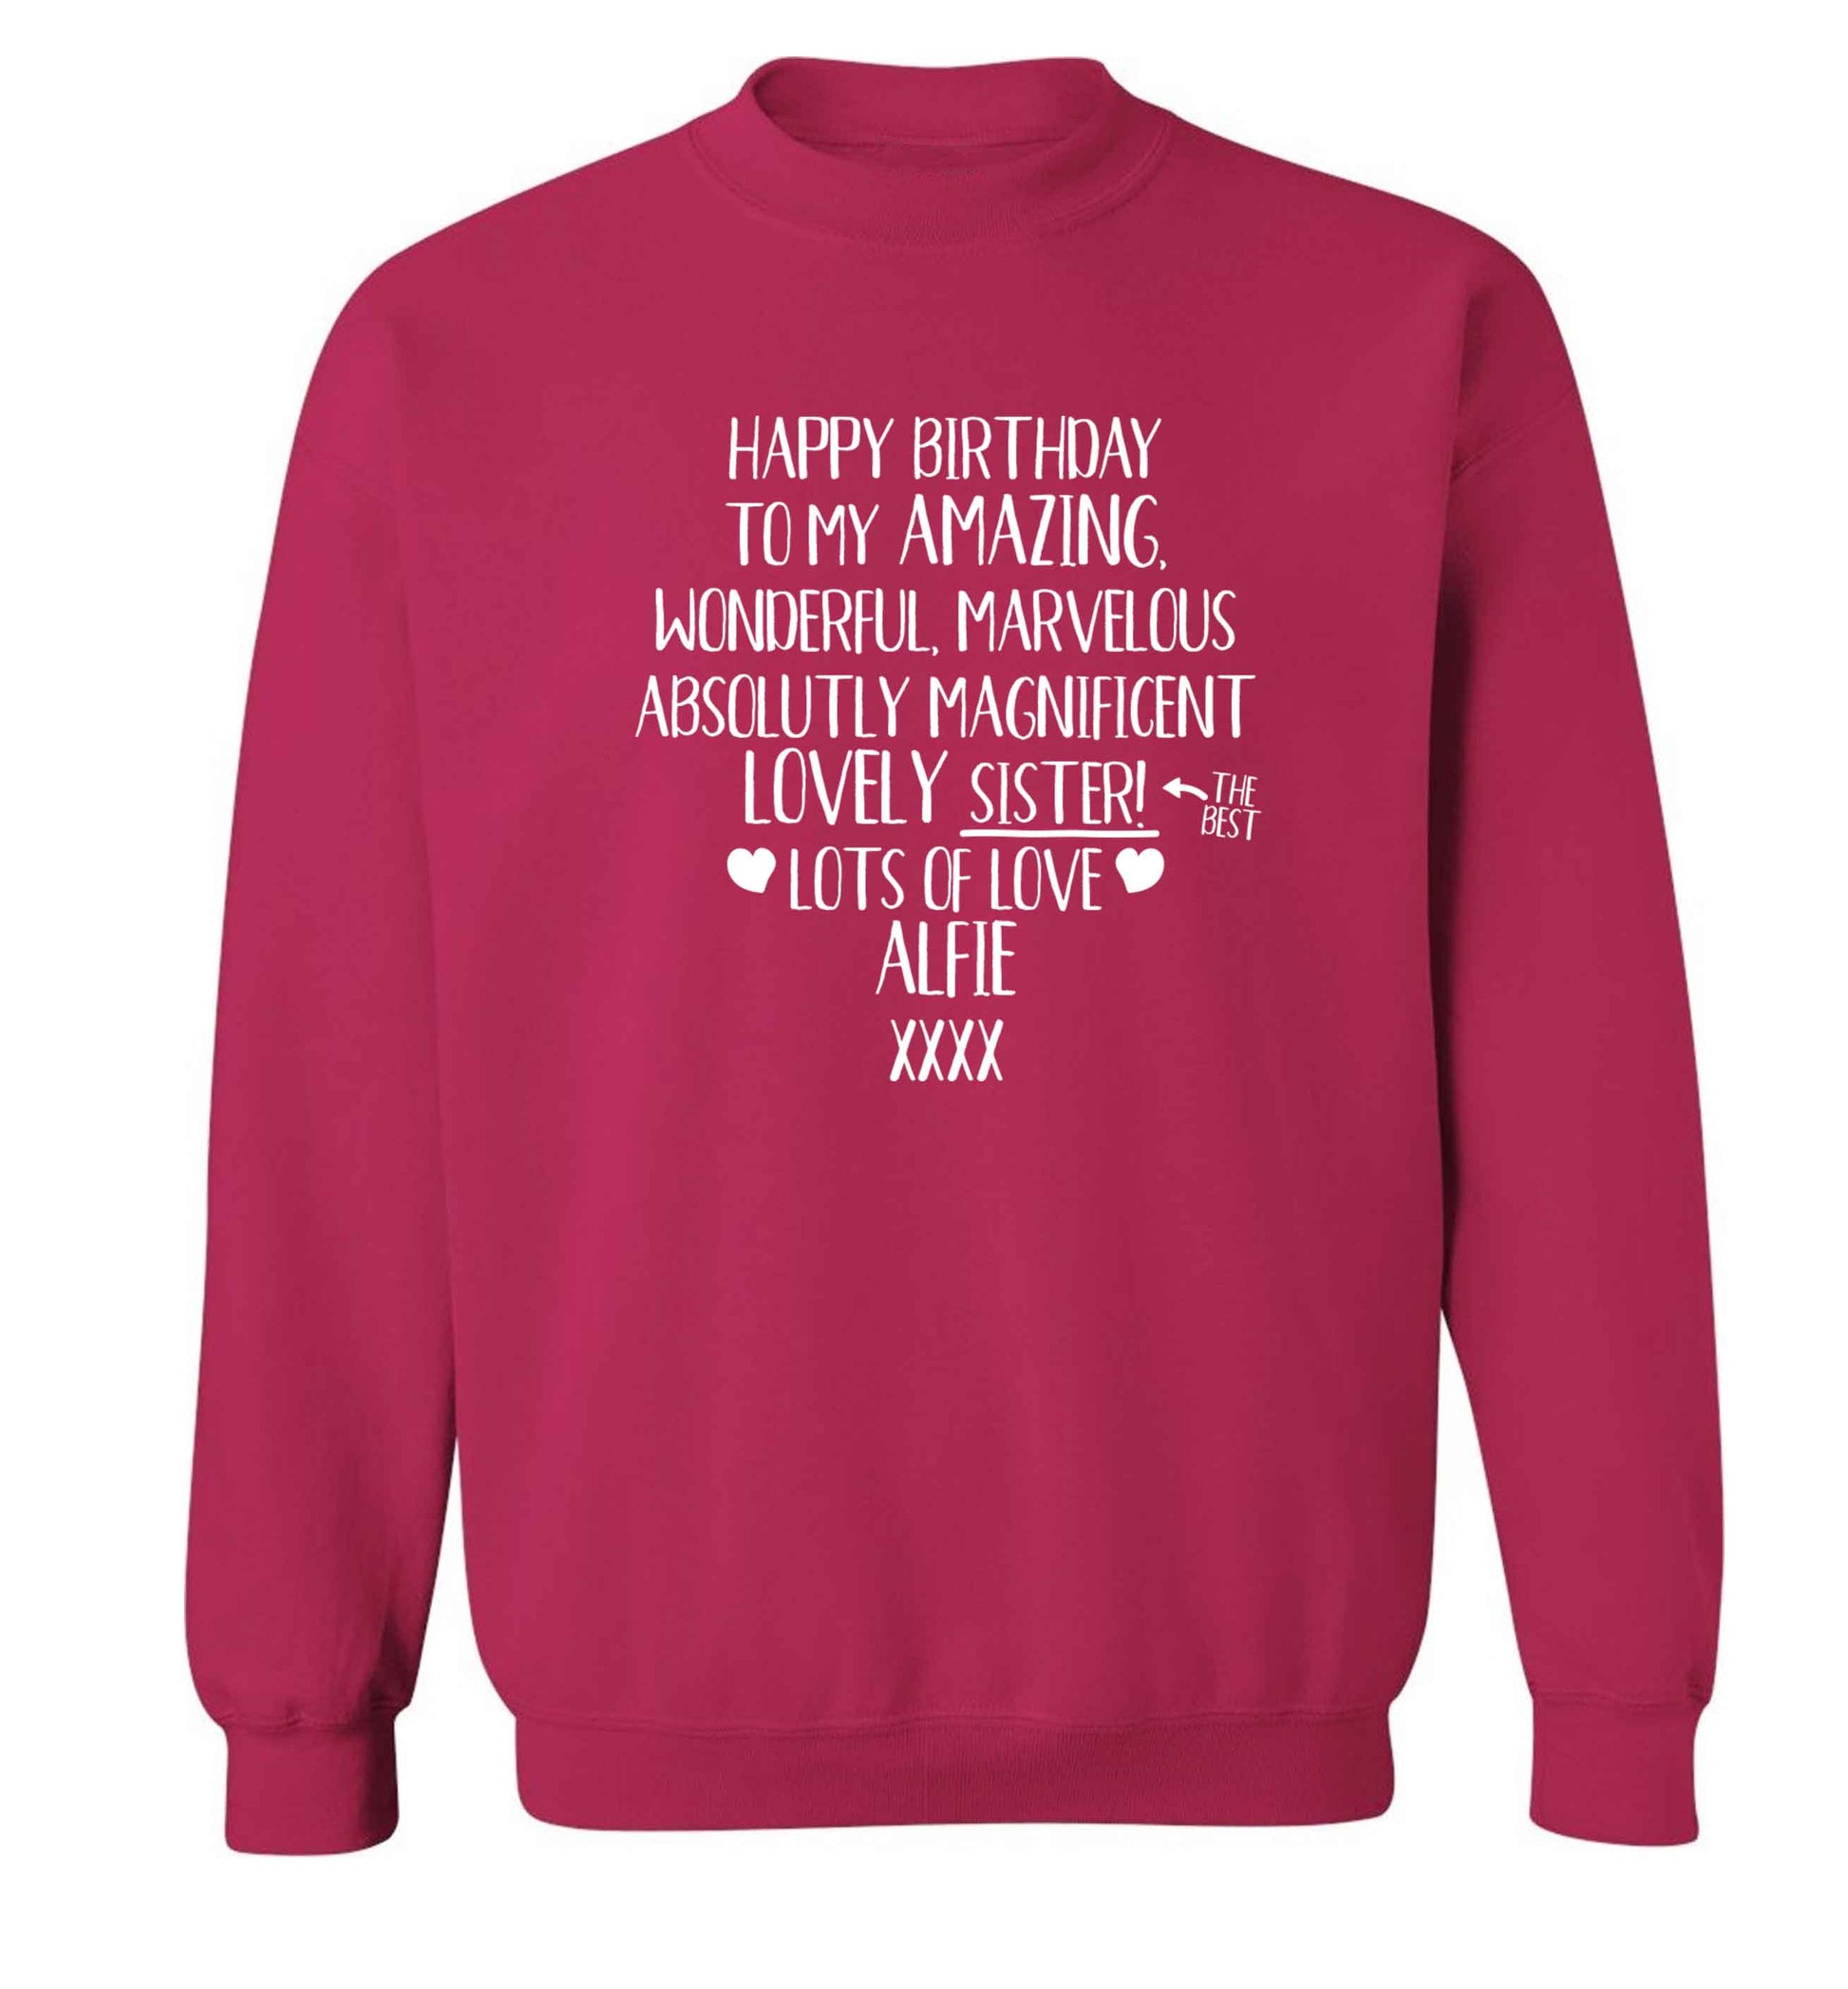 Personalised happy birthday to my amazing, wonderful, lovely sister Adult's unisex pink Sweater 2XL